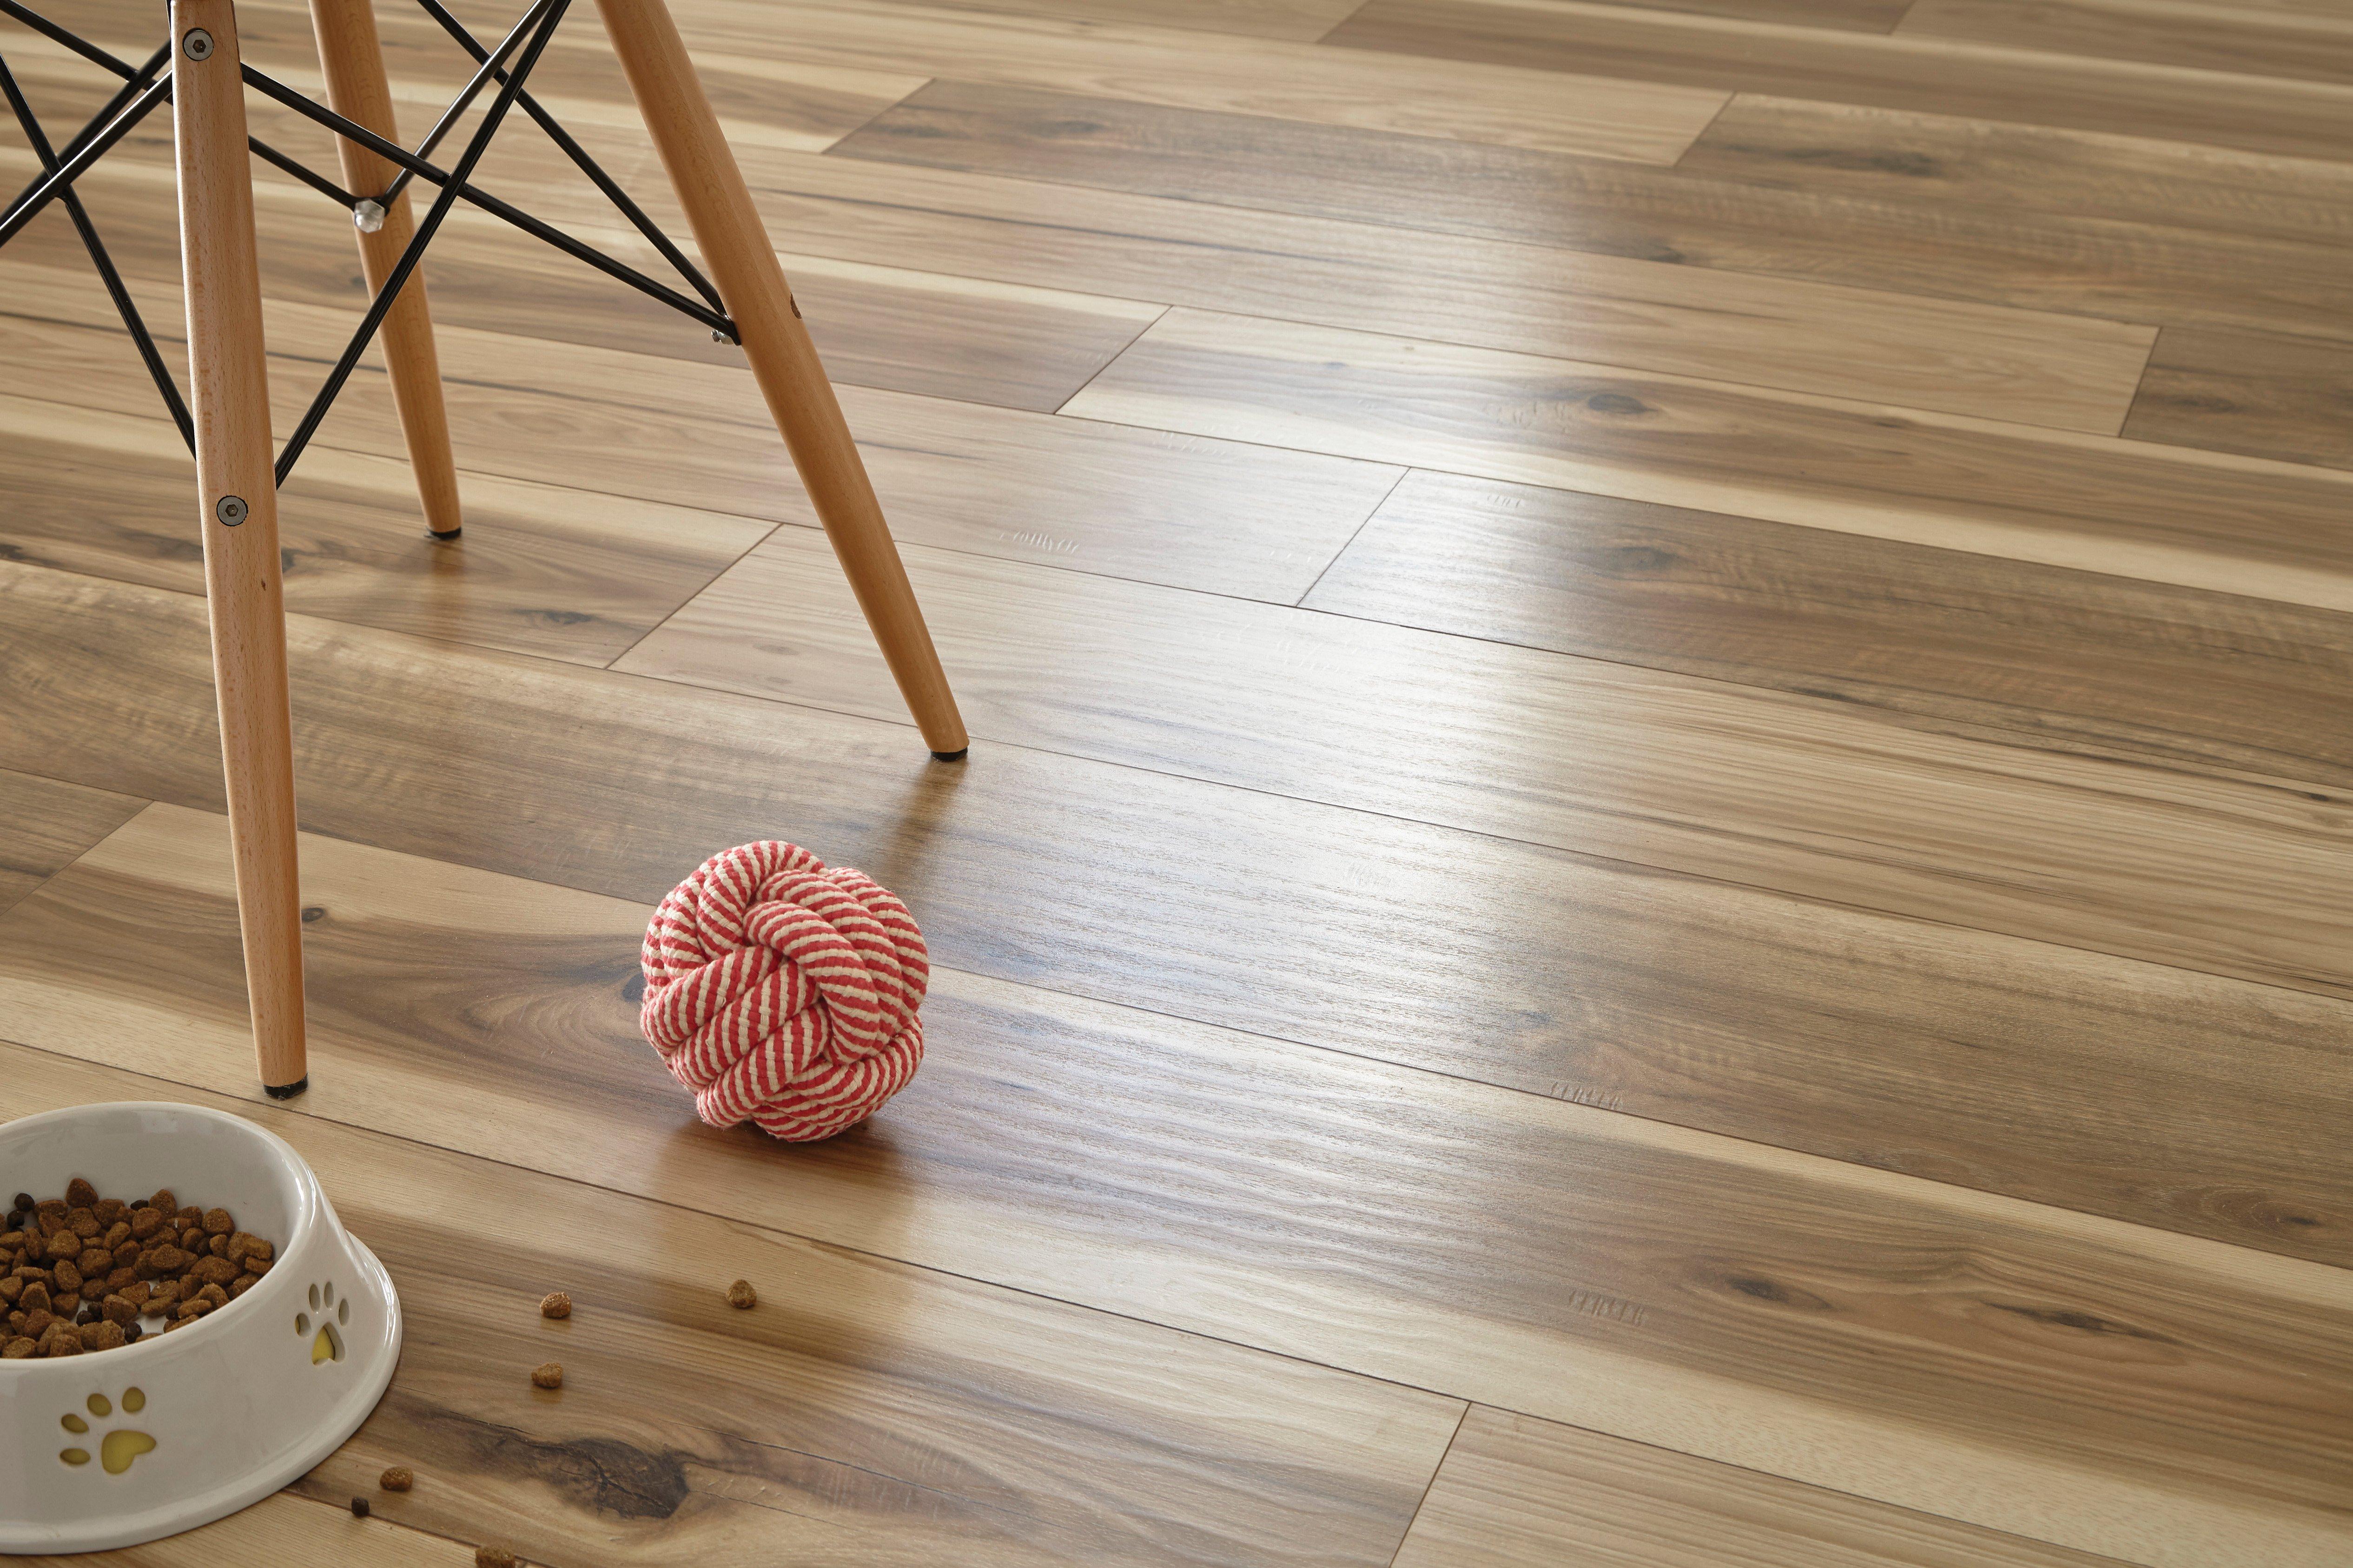 Whitegrove Hickory Water-Resistant Laminate